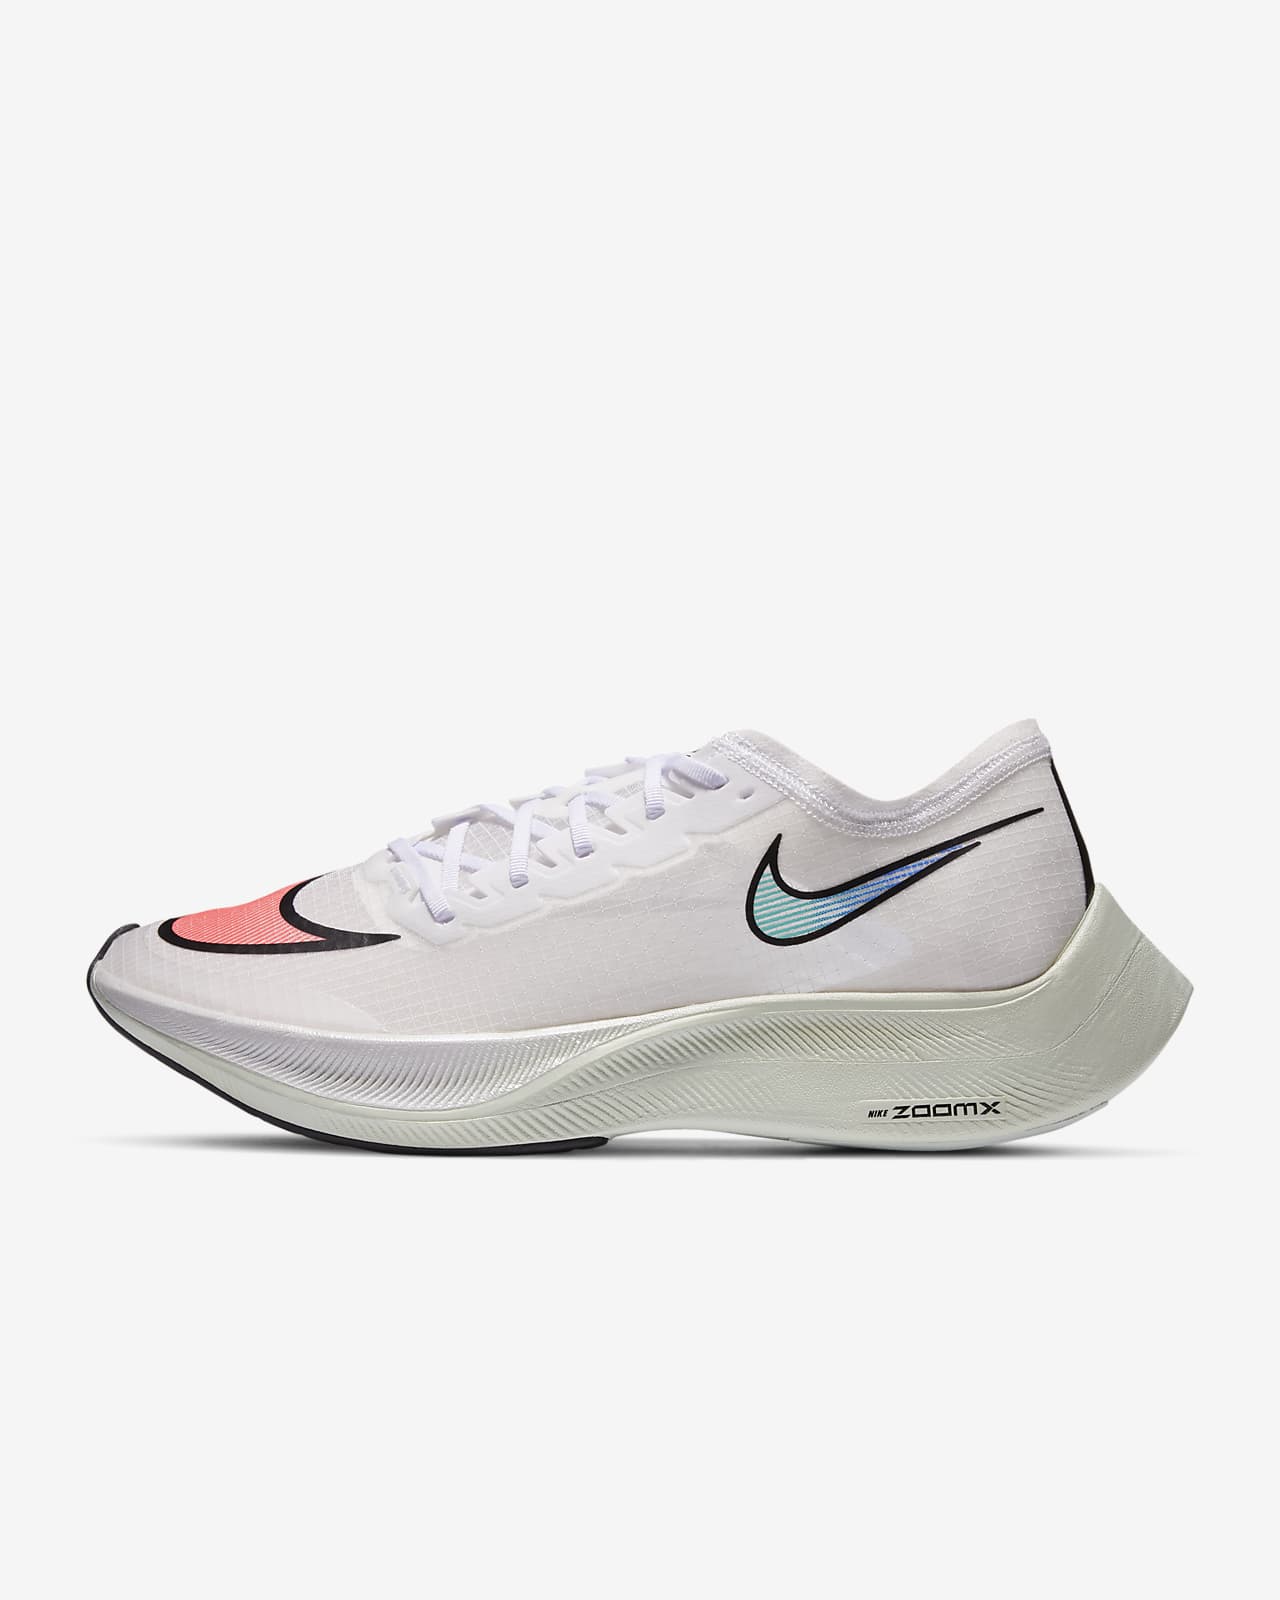 vaporfly shoes price